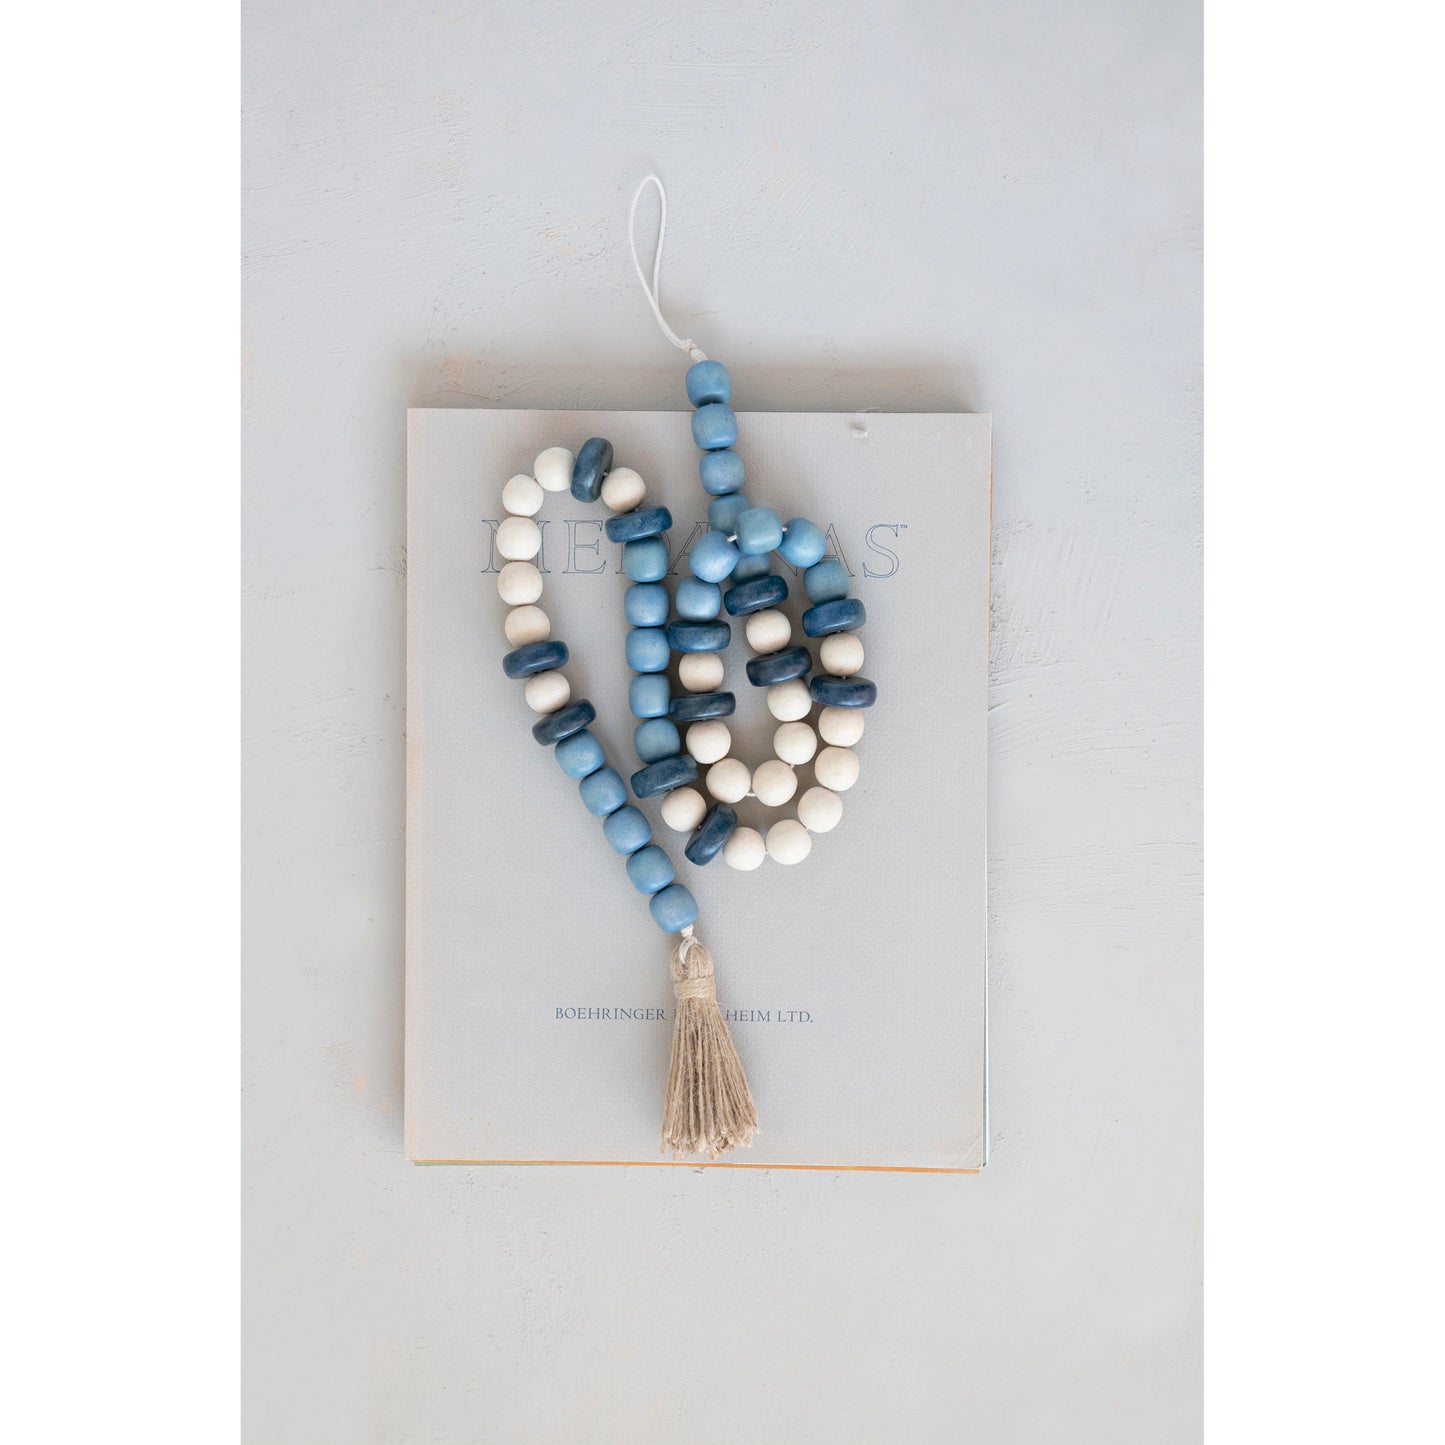 blue and white beaded garland with a jute tassel on one end arranged on a book.